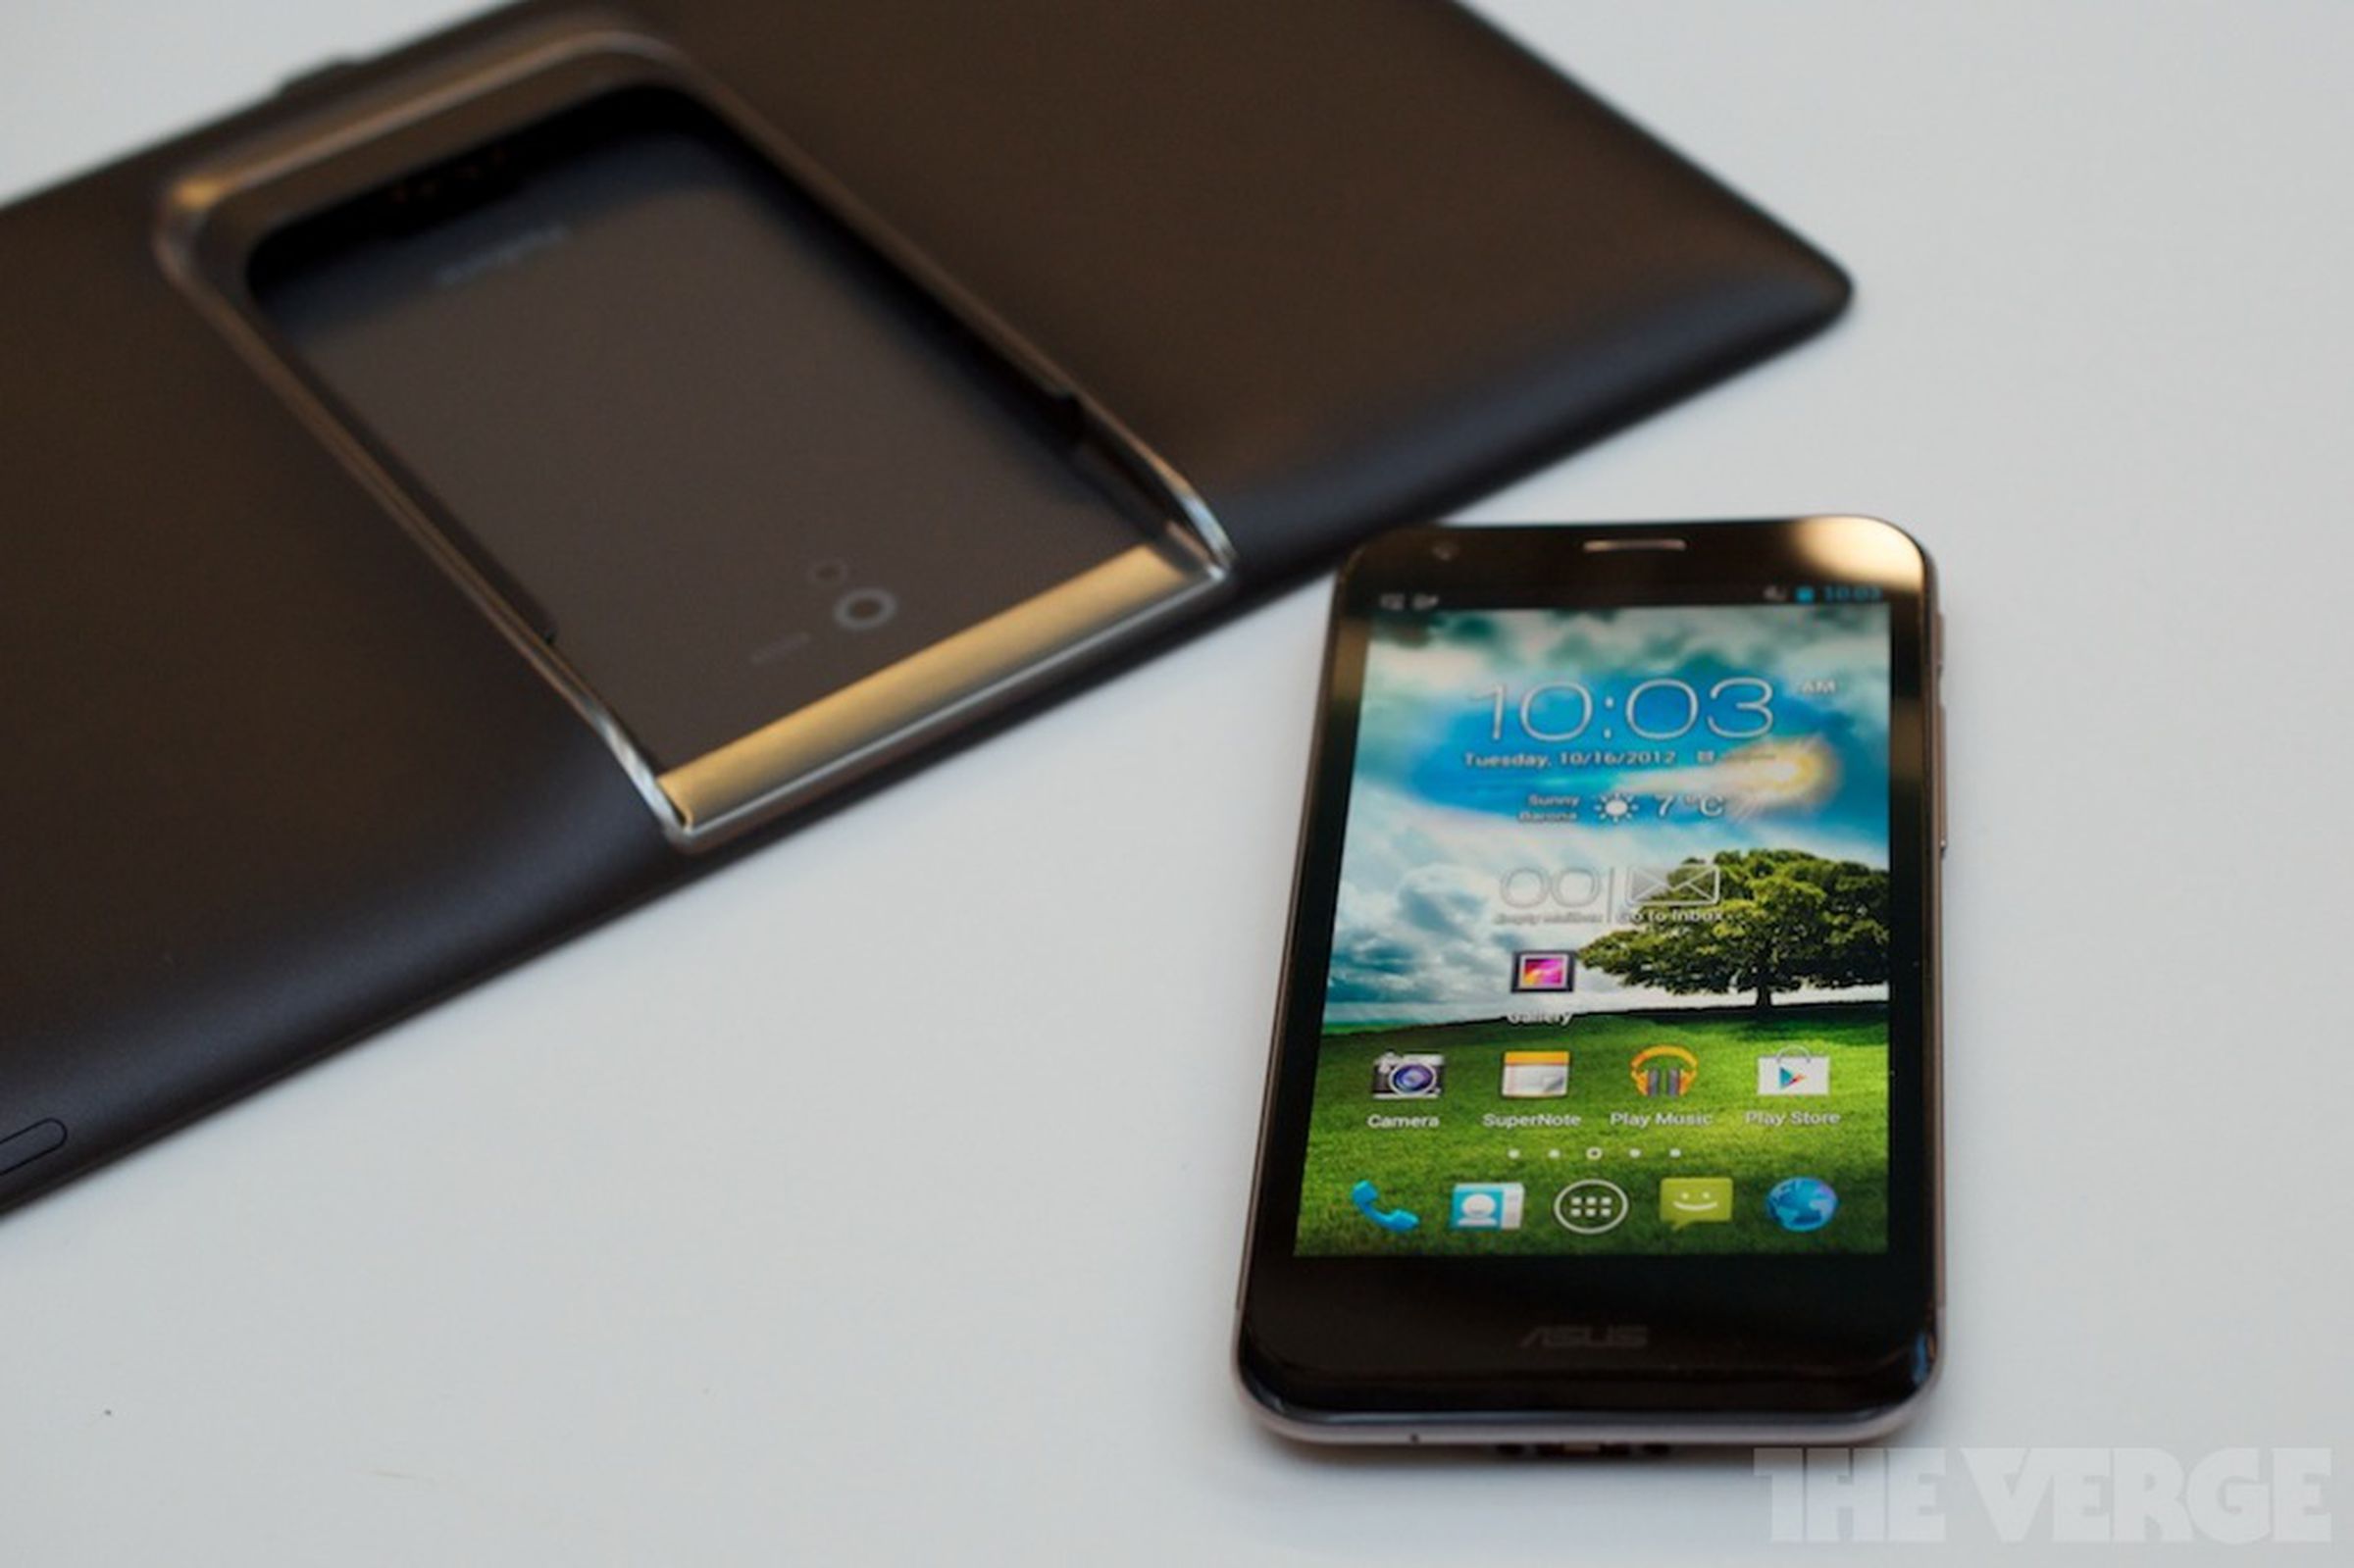 Asus PadFone 2 hands-on photos